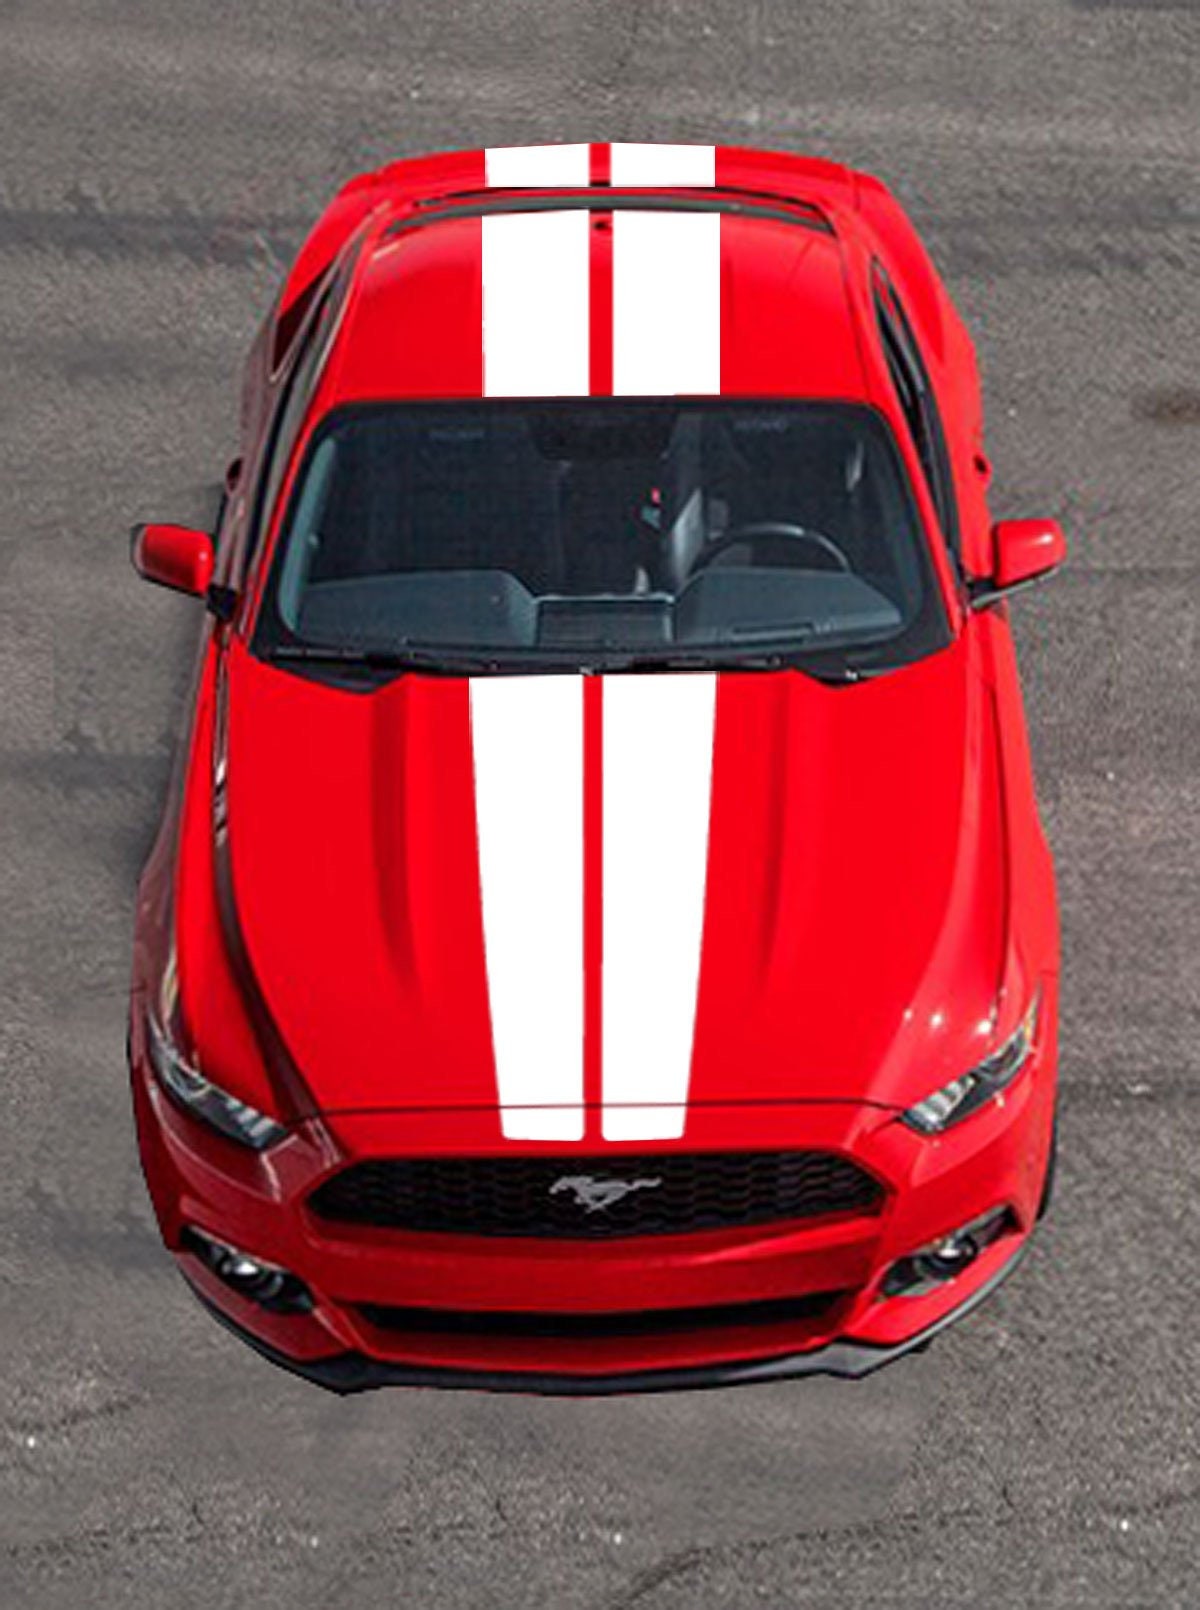 OGAUY Auto-Seiten-Aufkleber Für Ford Mustang Car Styling Sport Racing  Stripes Front-to-Heck Schweller Seitenschweller Aufkleber Aufkleber :  : Auto & Motorrad